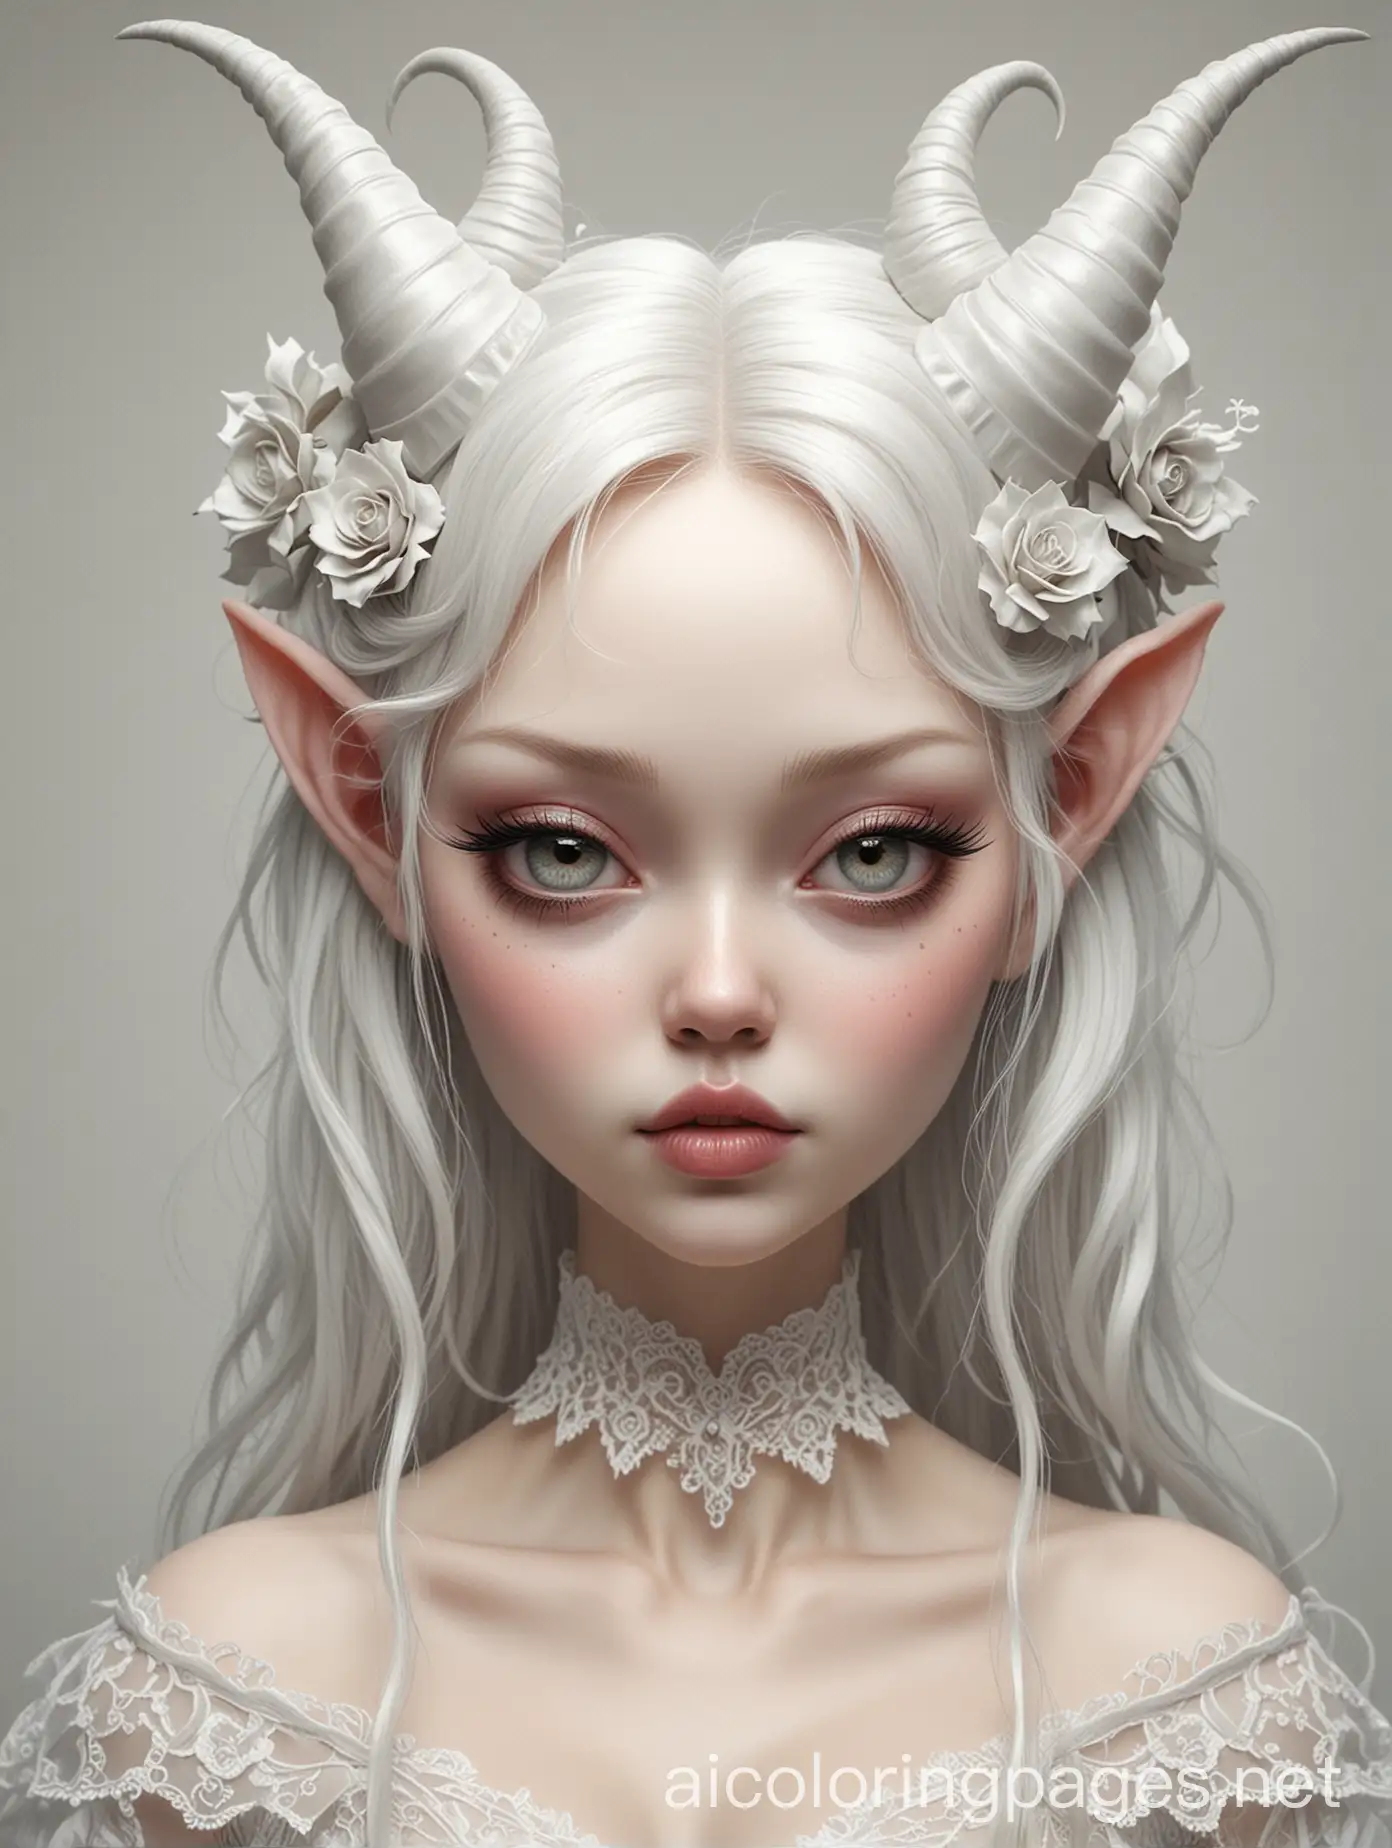 create a coloring book in surrealistic style of nicoletta ceccoli and mark ryden,  a drawing of a beautiful succubus demon woman. Her long, silky hair, full of mysterious light. Her face has symmetrical features, high cheekbones, full lips, and a gently curved nose. Add subtle demonic traits such as thin, membranous wings, sharp claws, and horns hidden among her hair. Her outfit is made of delicate materials like silk and lace, a powerful aura of magnetism and allure. highly detailed, lee bermejo, kim jung gi, hi - fructose art magazine, smooth shading techniques, still from animated horror movie,  one line artwork print, by Yang Jin, Coloring Page, black and white, line art, white background, Simplicity, Ample White Space.